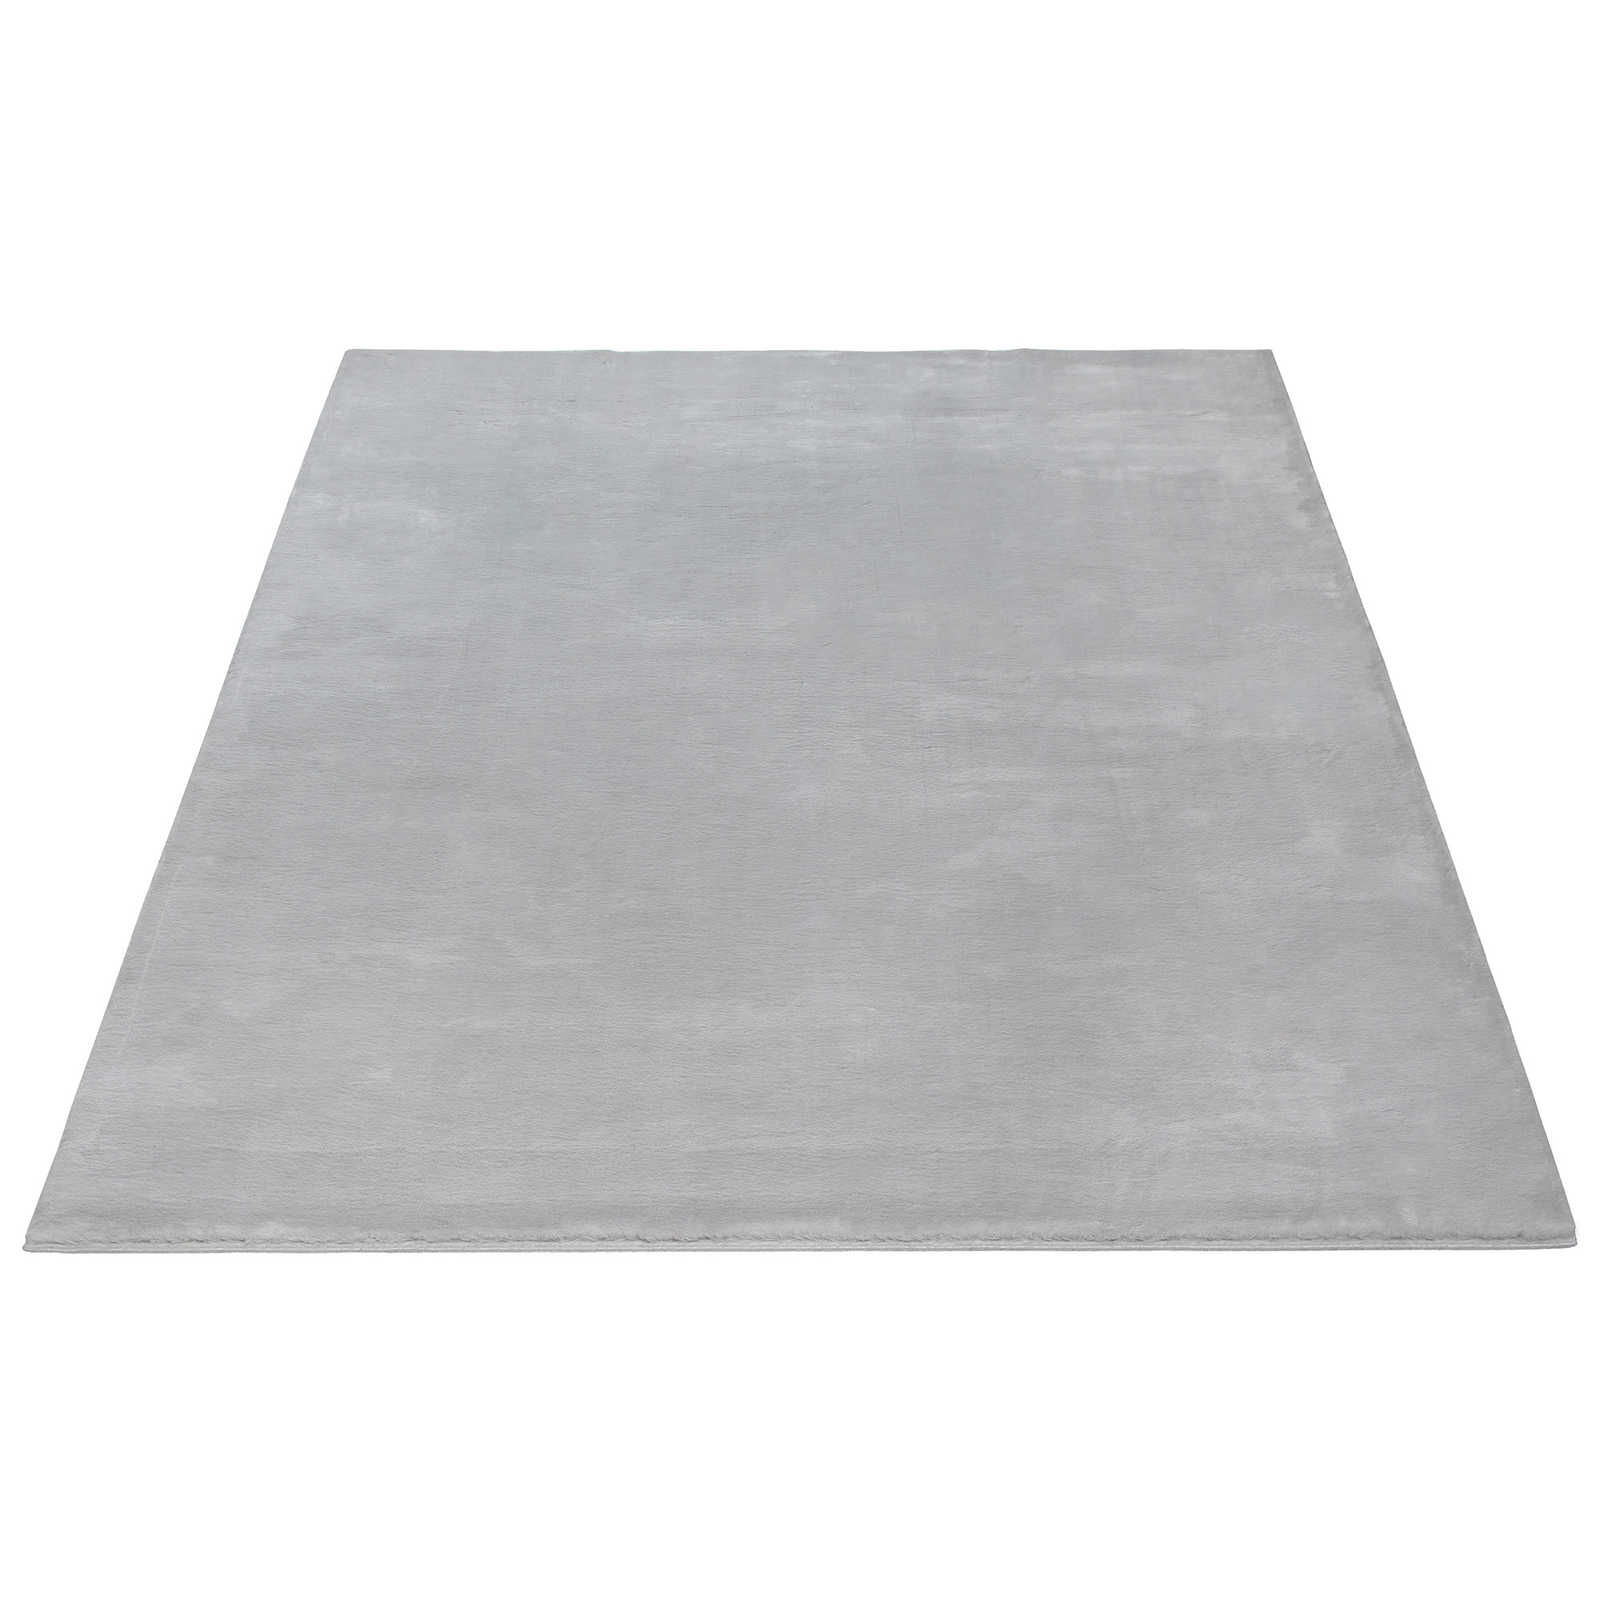 Cosy high pile carpet in soft grey - 290 x 200 cm
